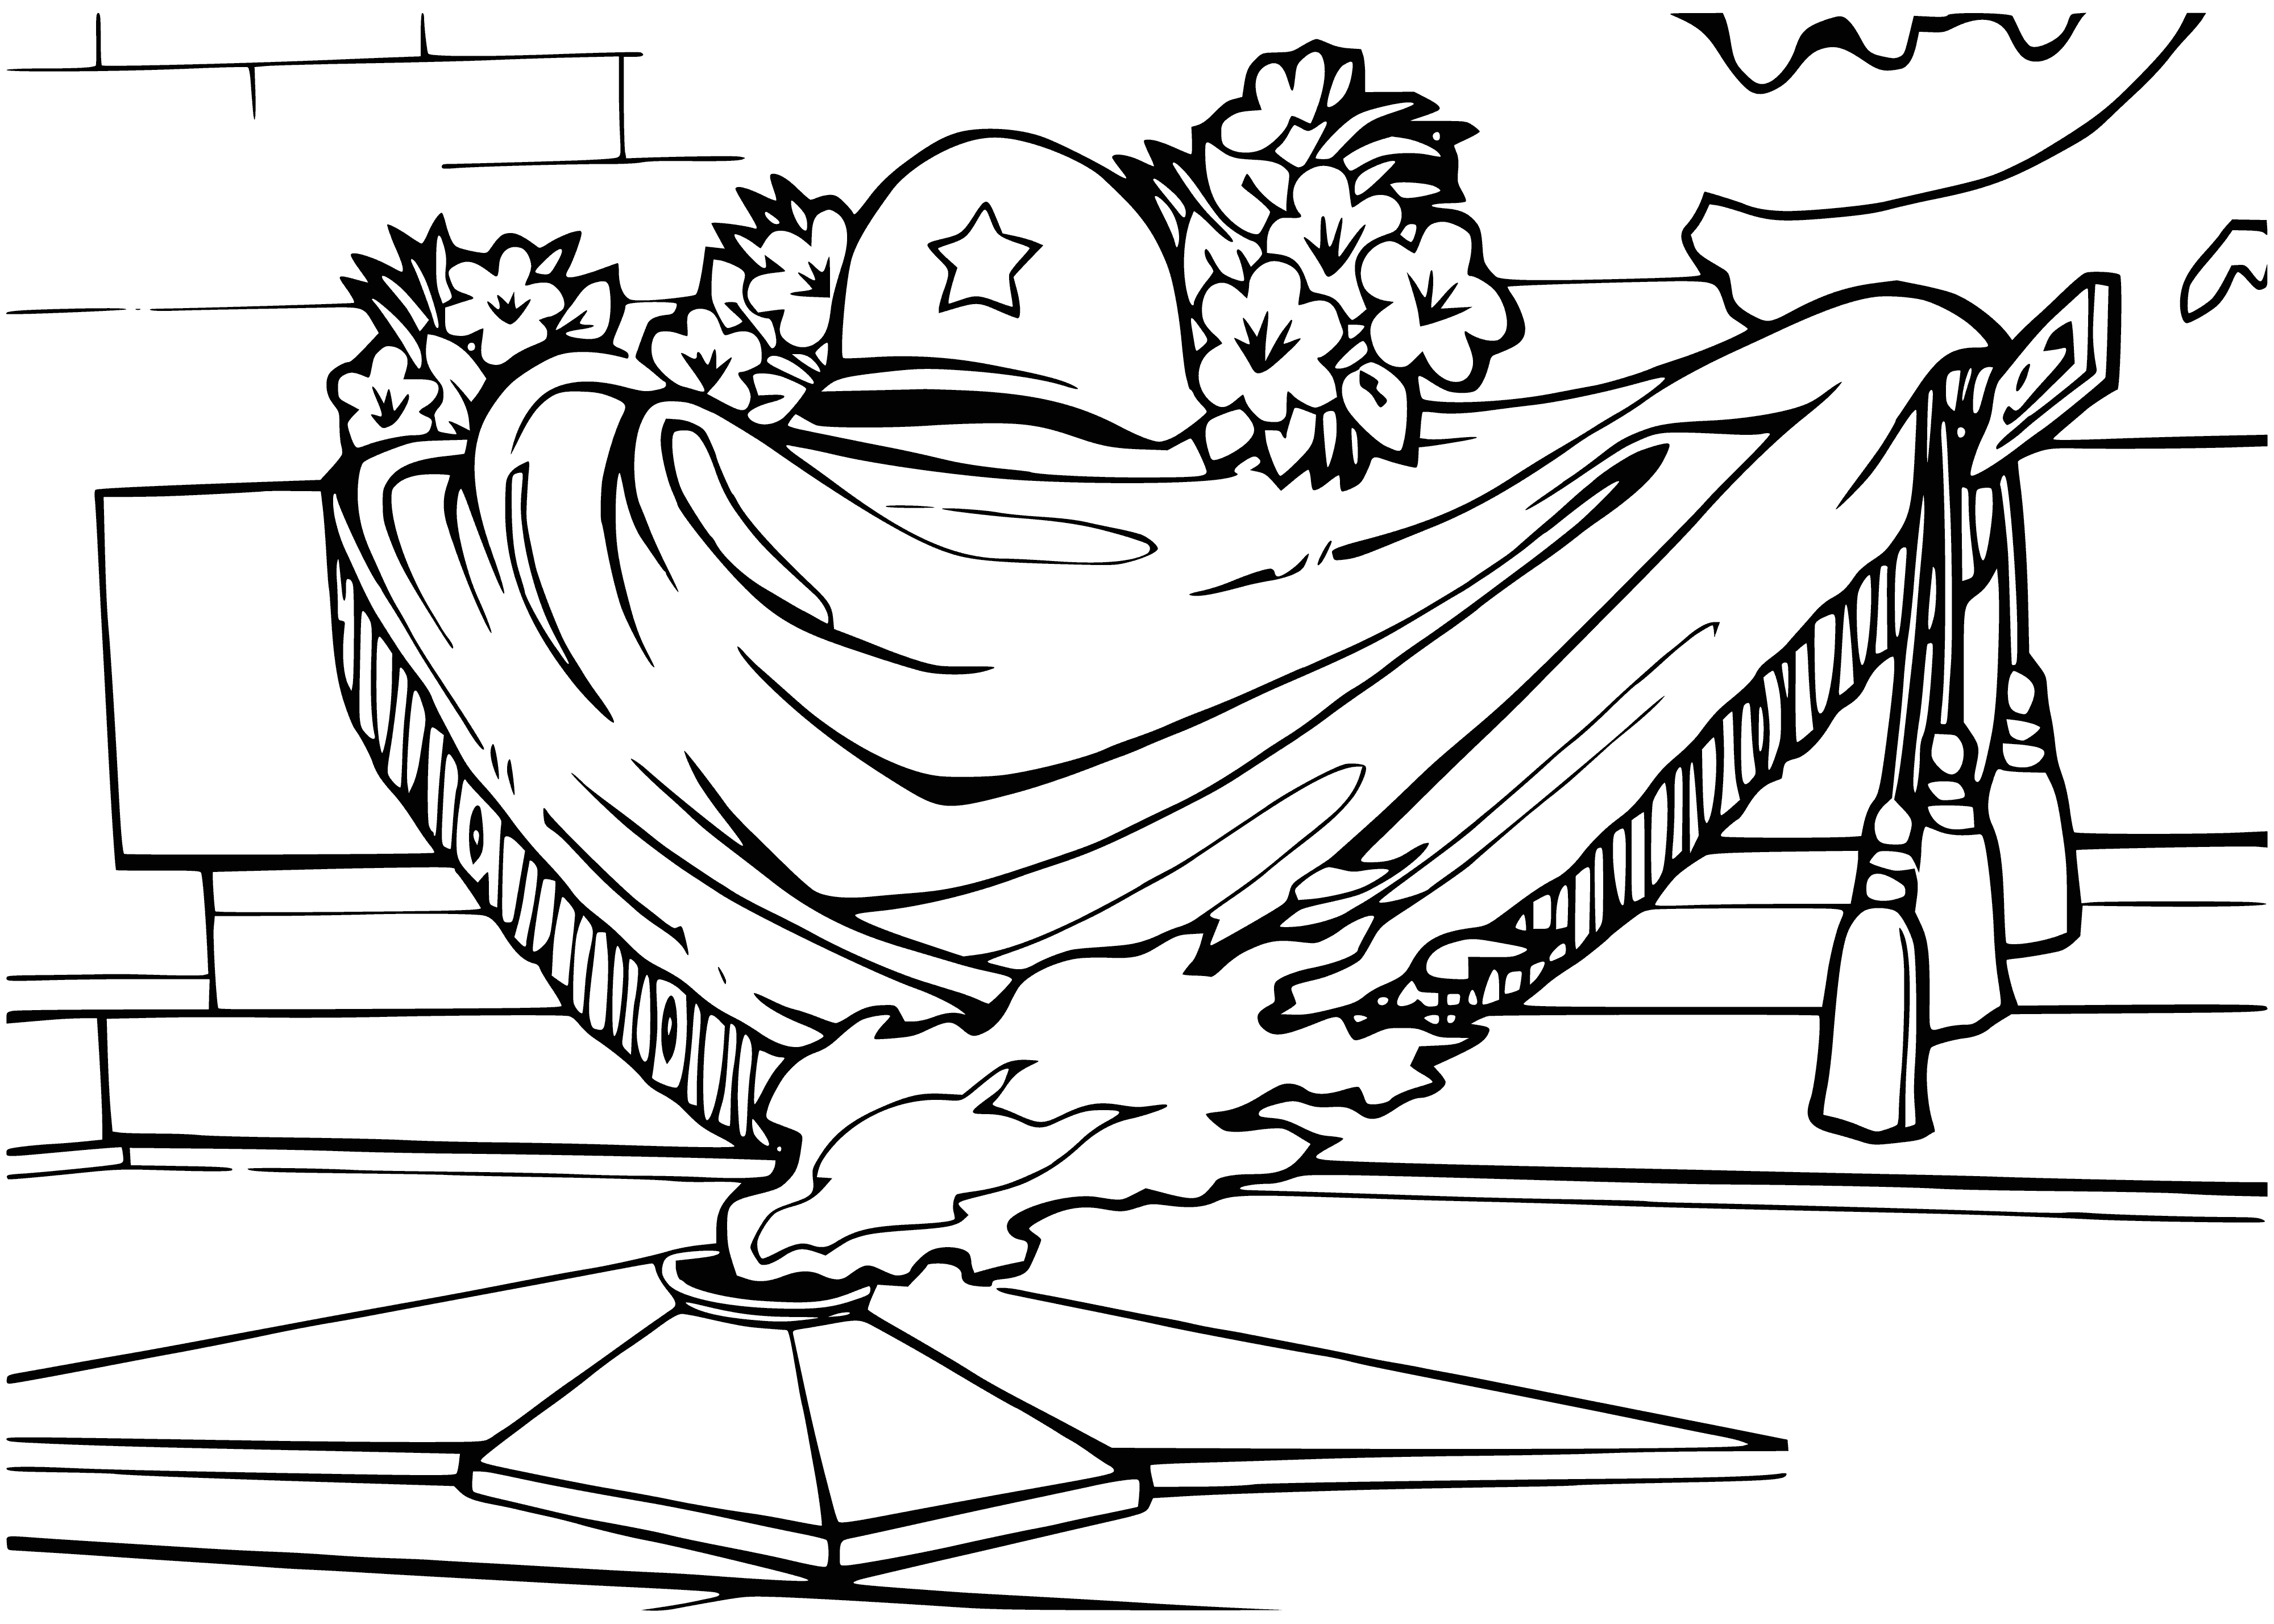 Everlasting memory coloring page